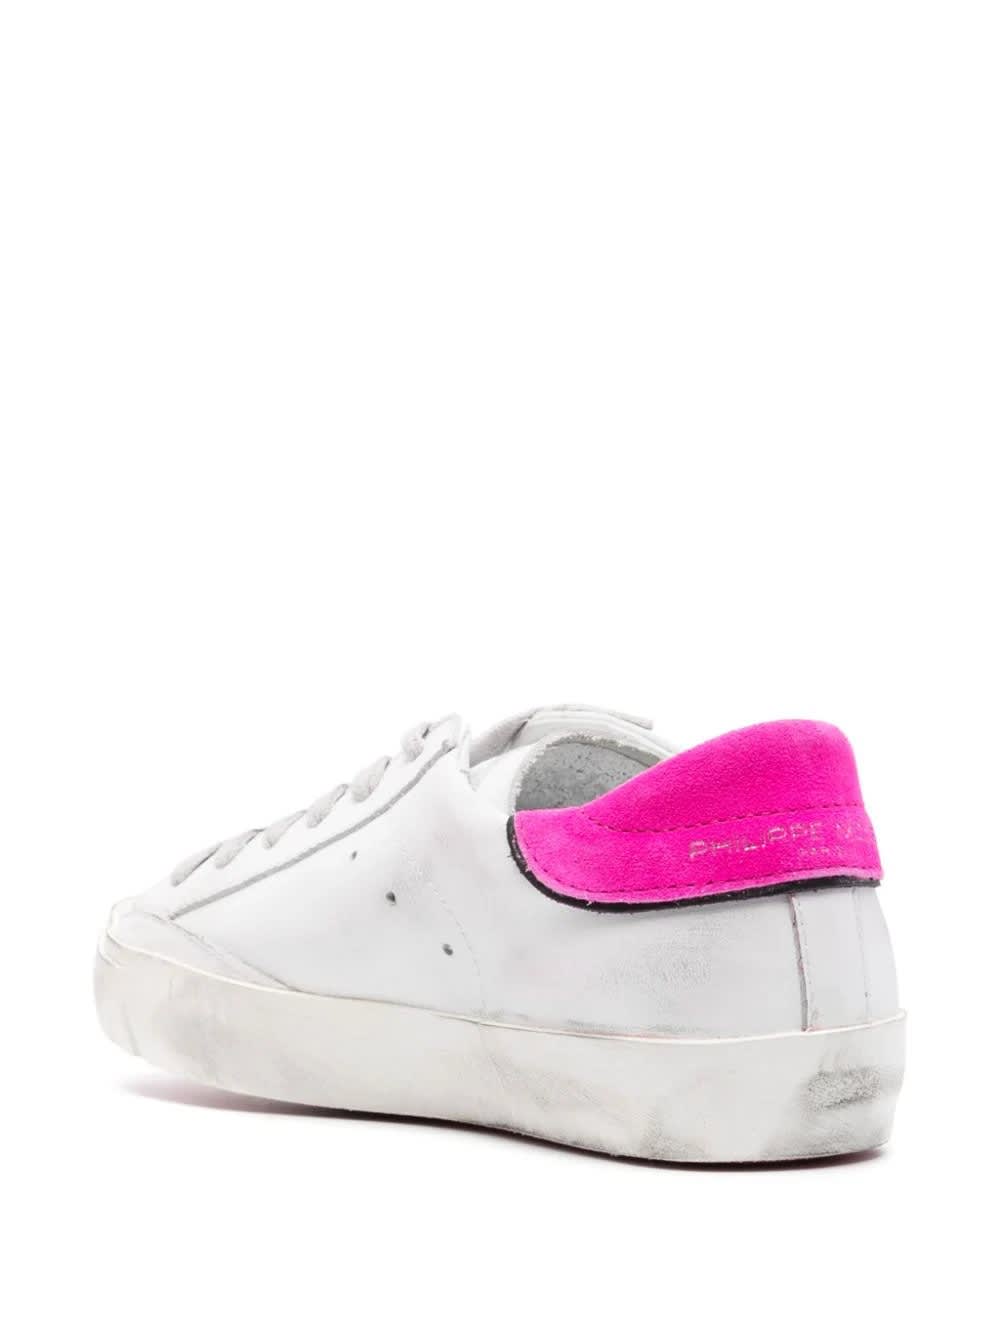 Shop Philippe Model Prsx Low Sneakers - White And Fuchsia